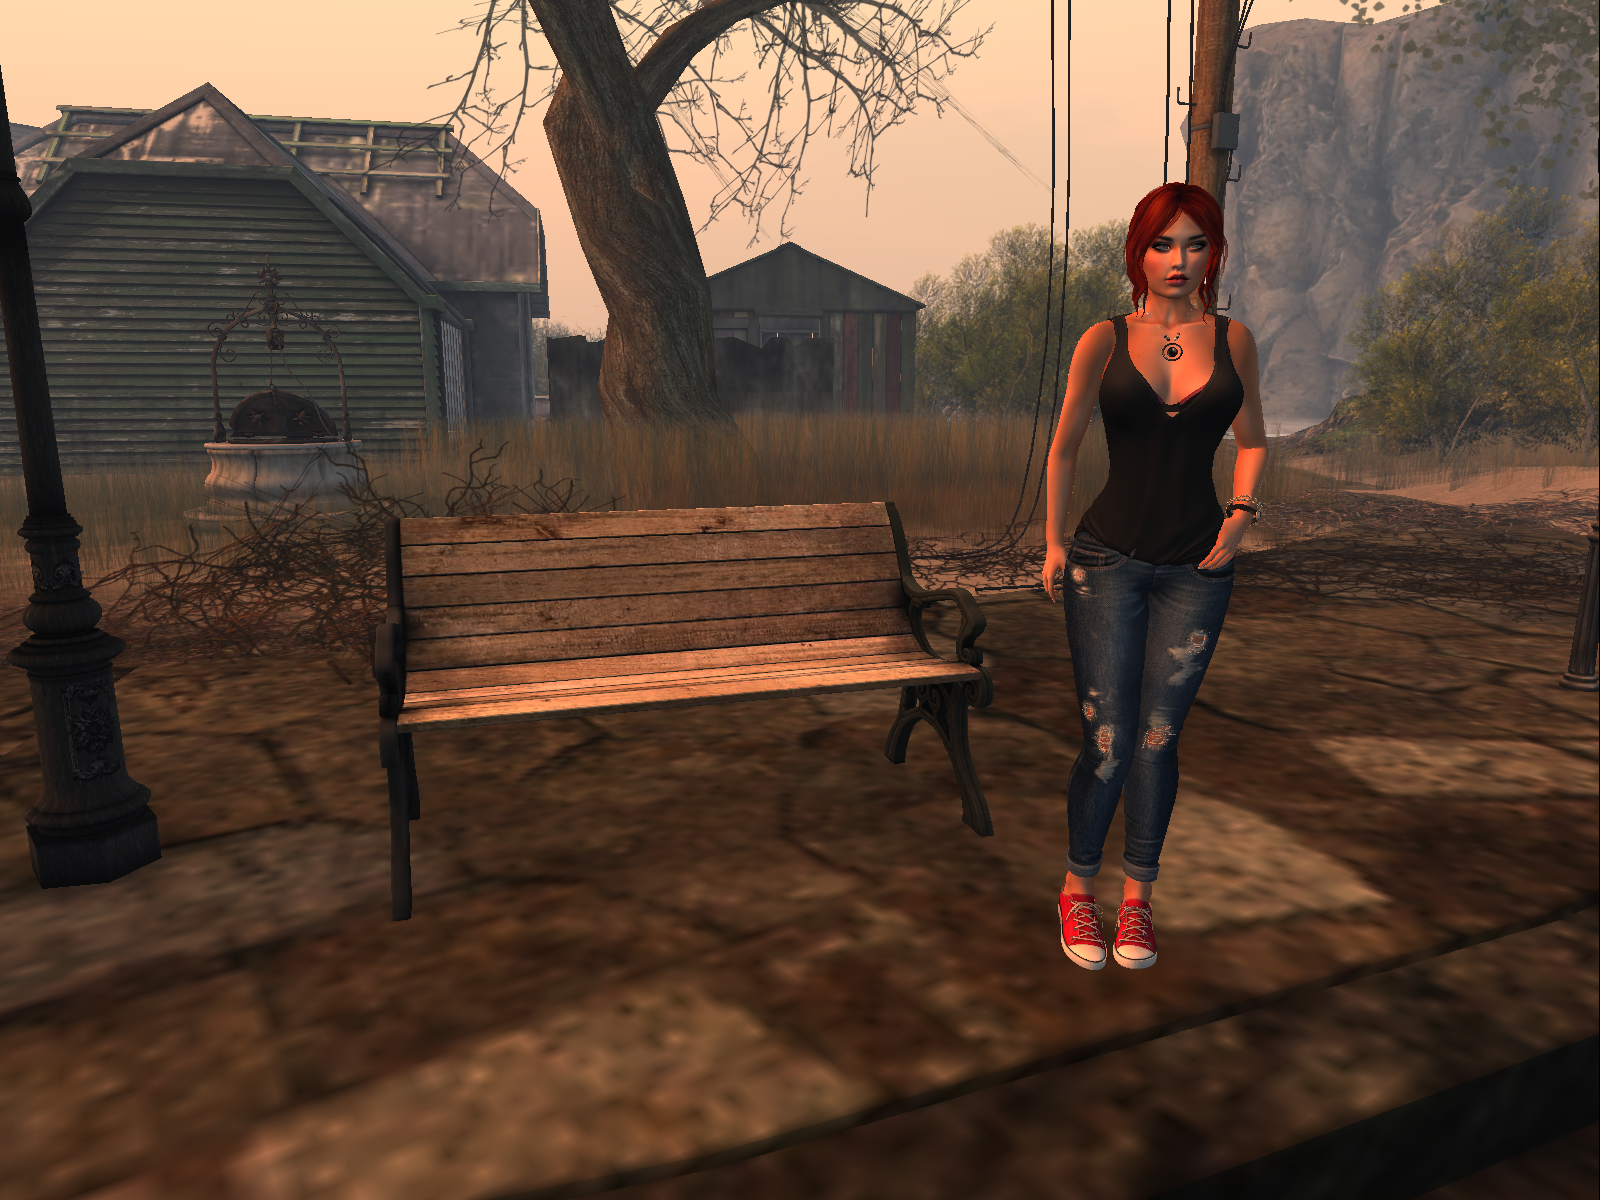 Writing about Second Life